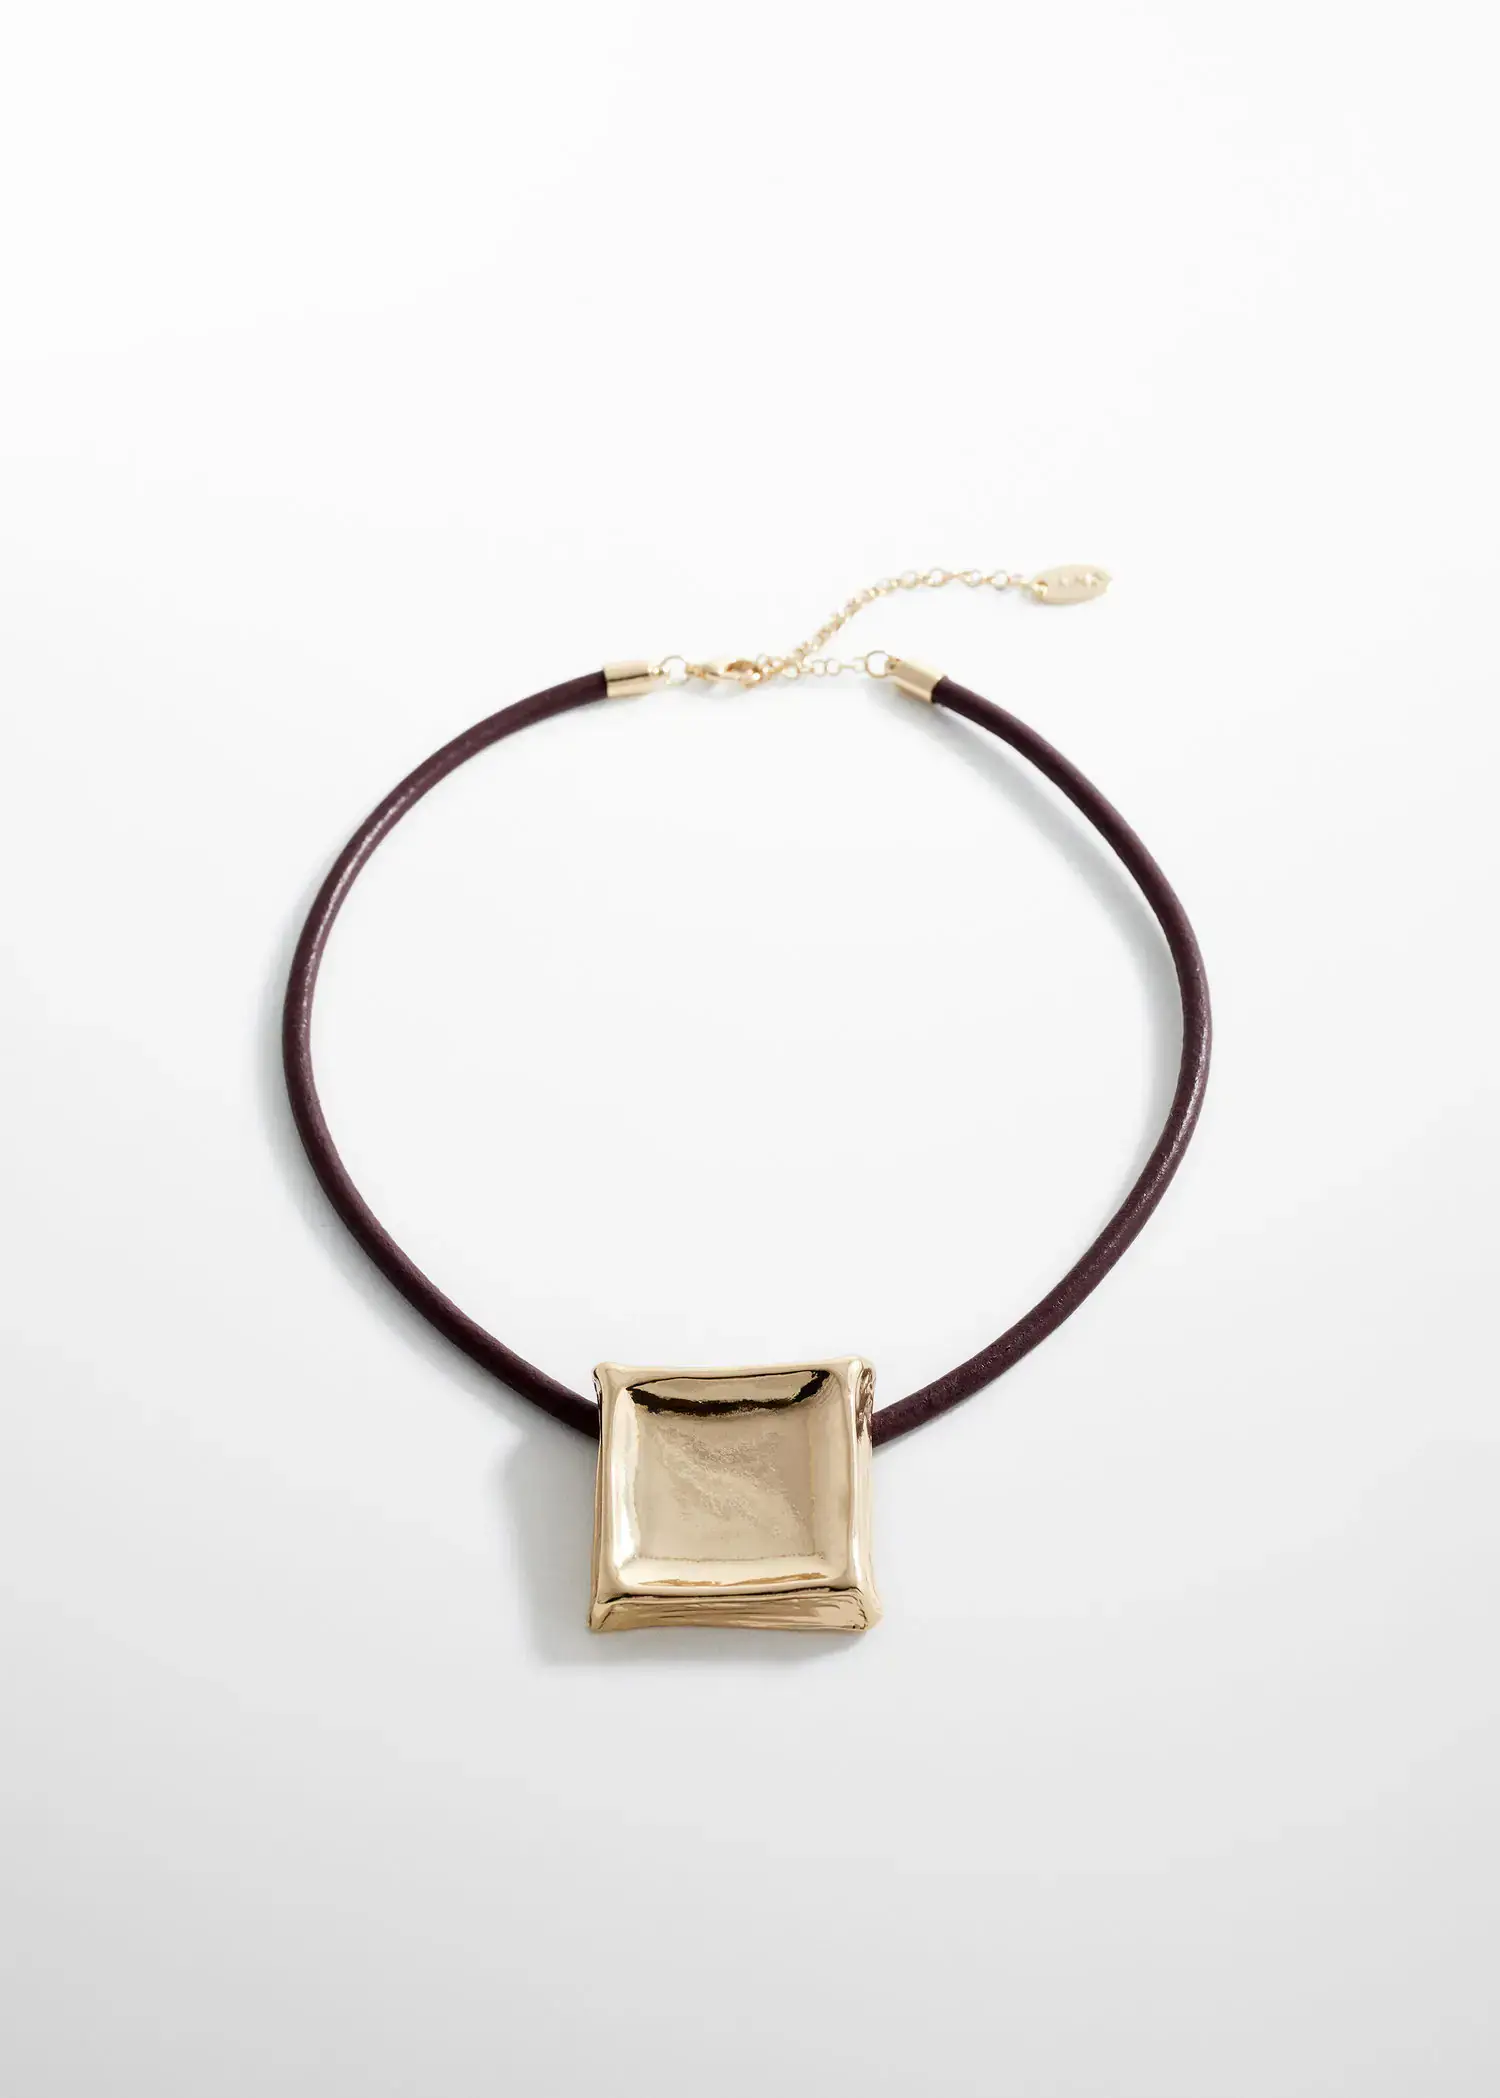 Mango Leather cord necklace. 1